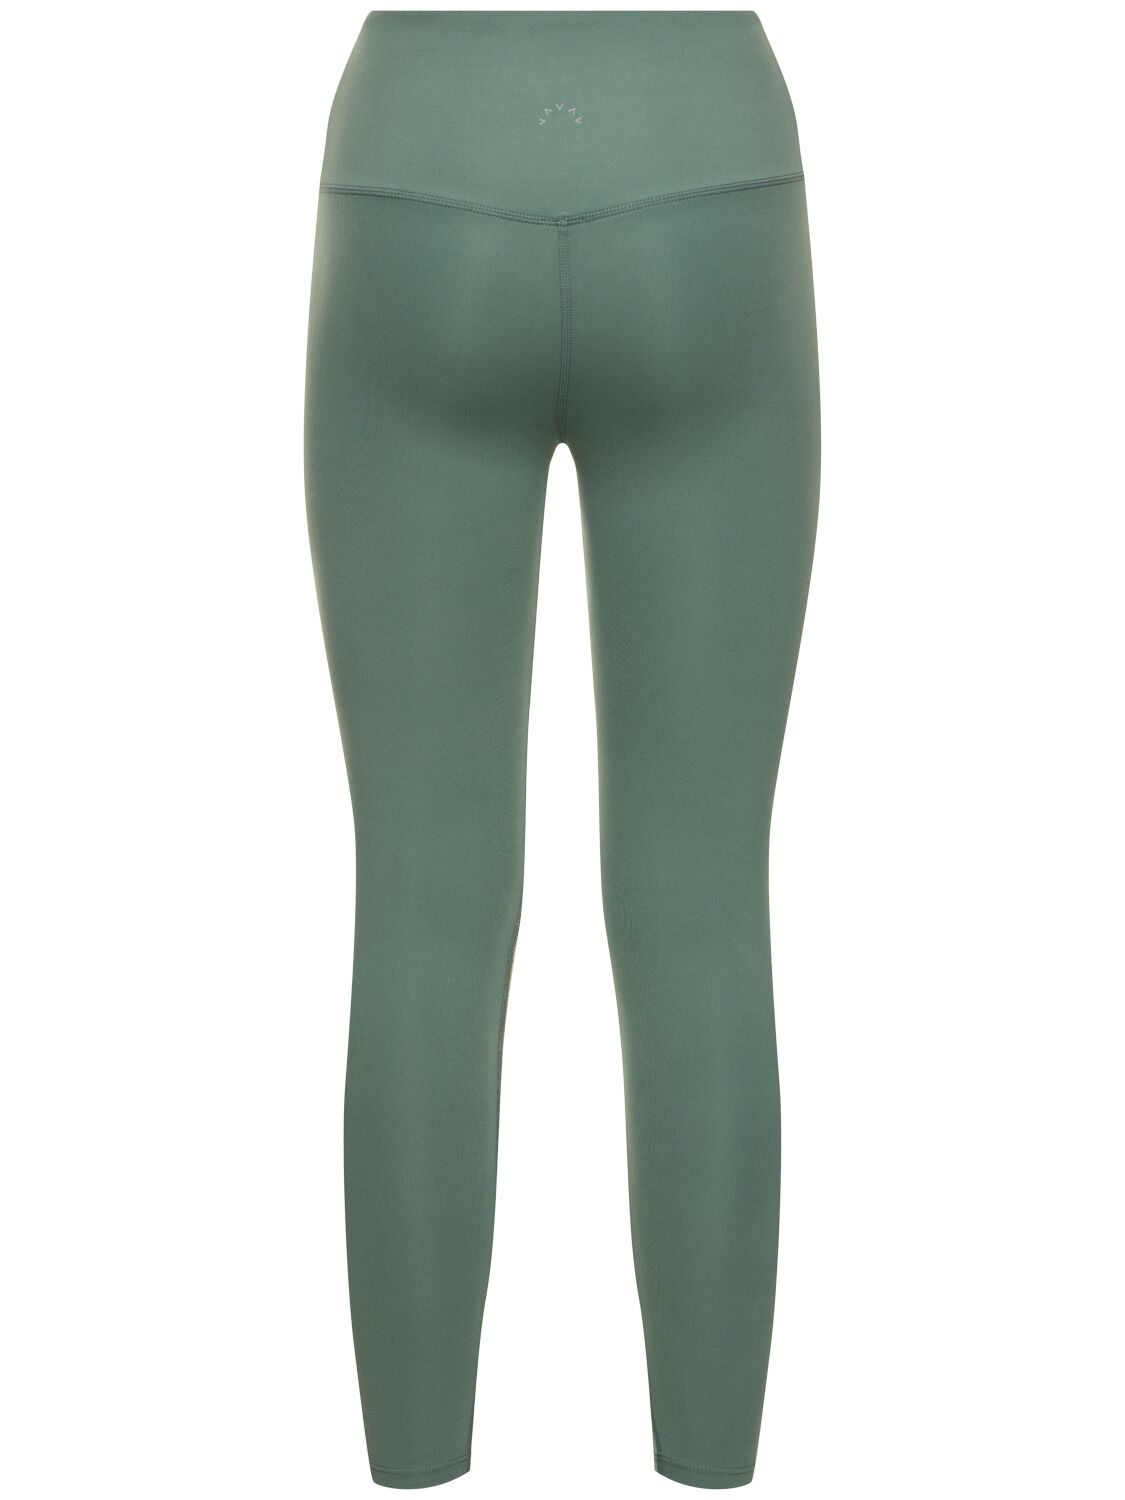 Shop Varley Let's Move Leggings In Turquoise